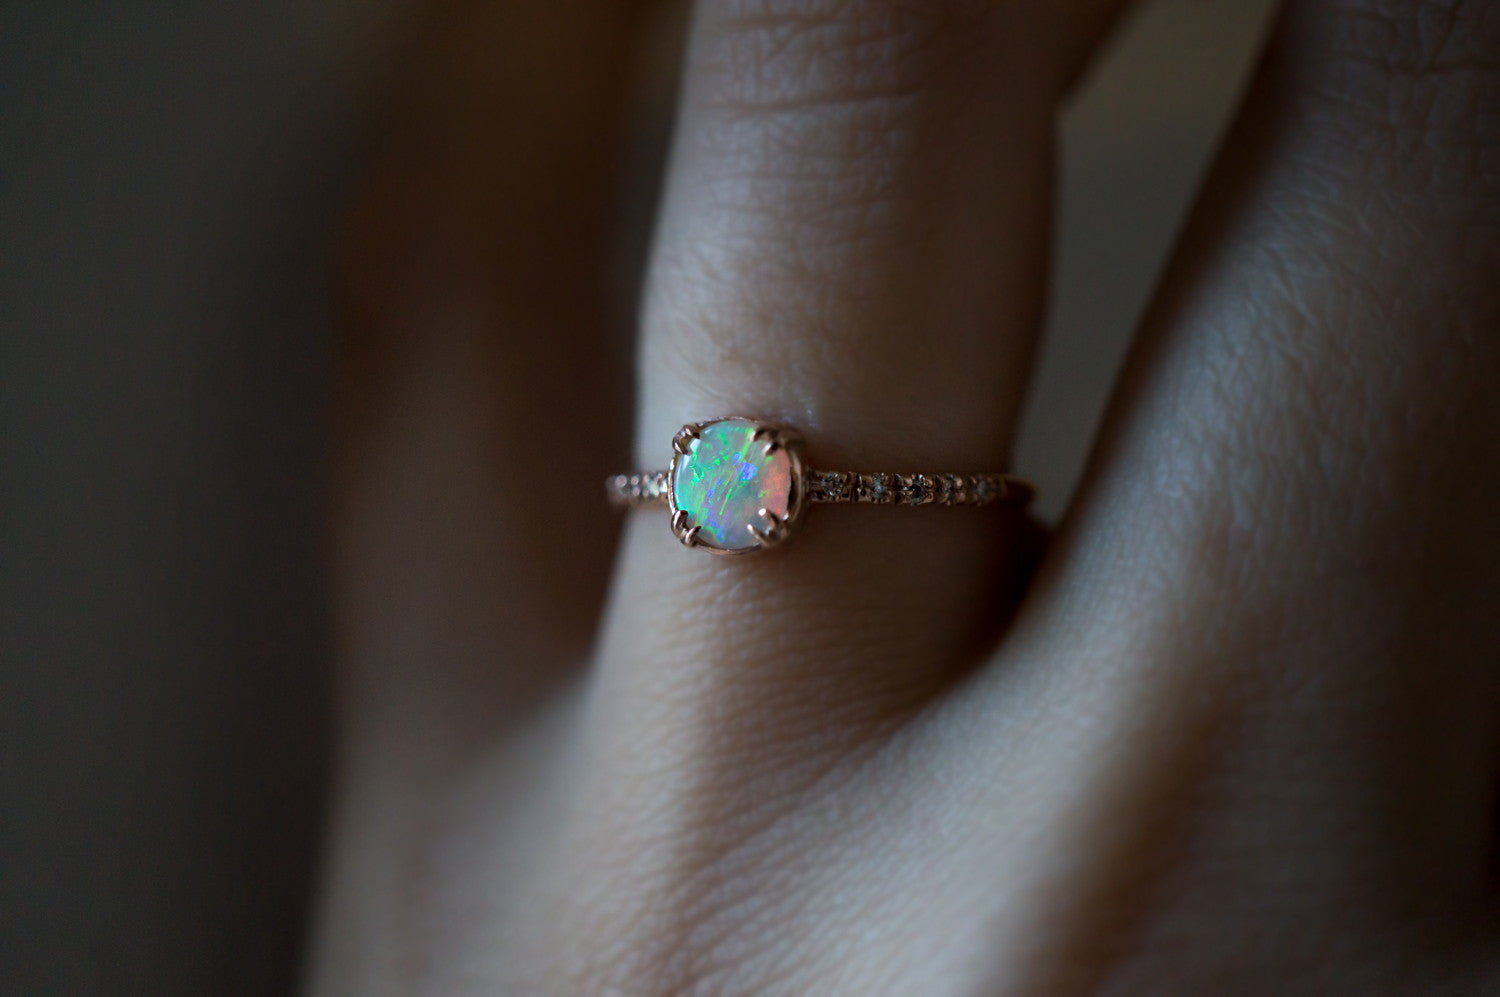 Brushstroke Opal Solitaire Ring with Pavé Band & Secret Diamond - S. Kind & Co